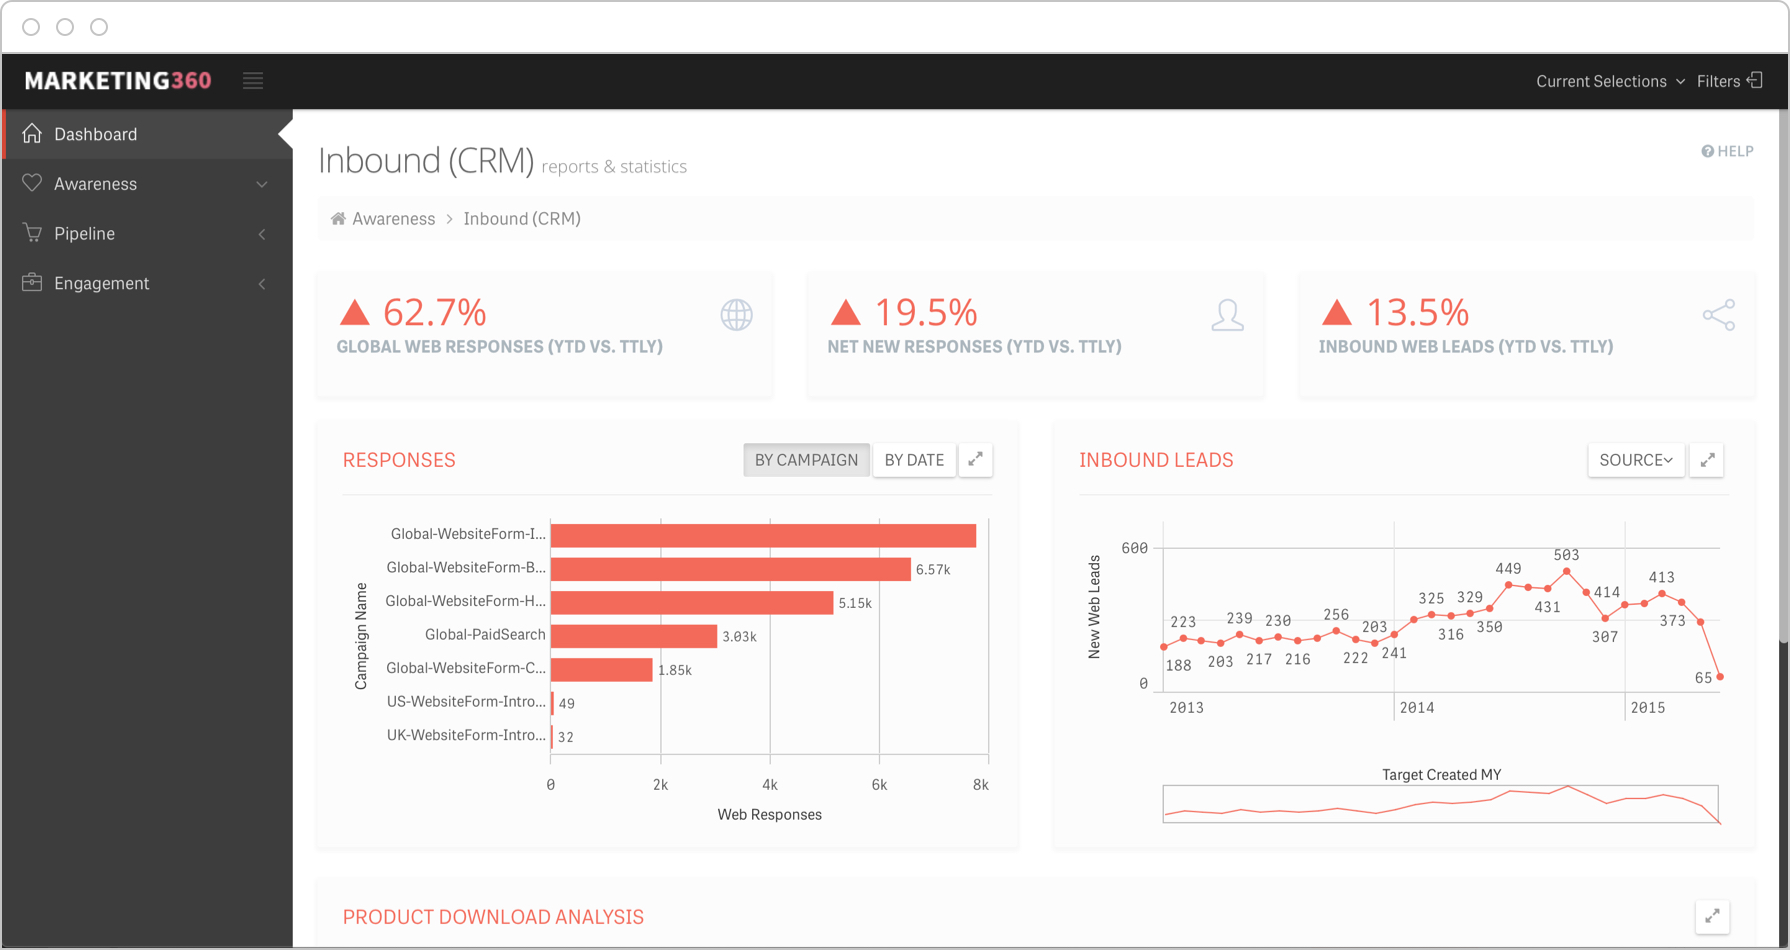 Inbound leads dashboards integrate data from multiple platforms to drill into leads and goals for campaigns.